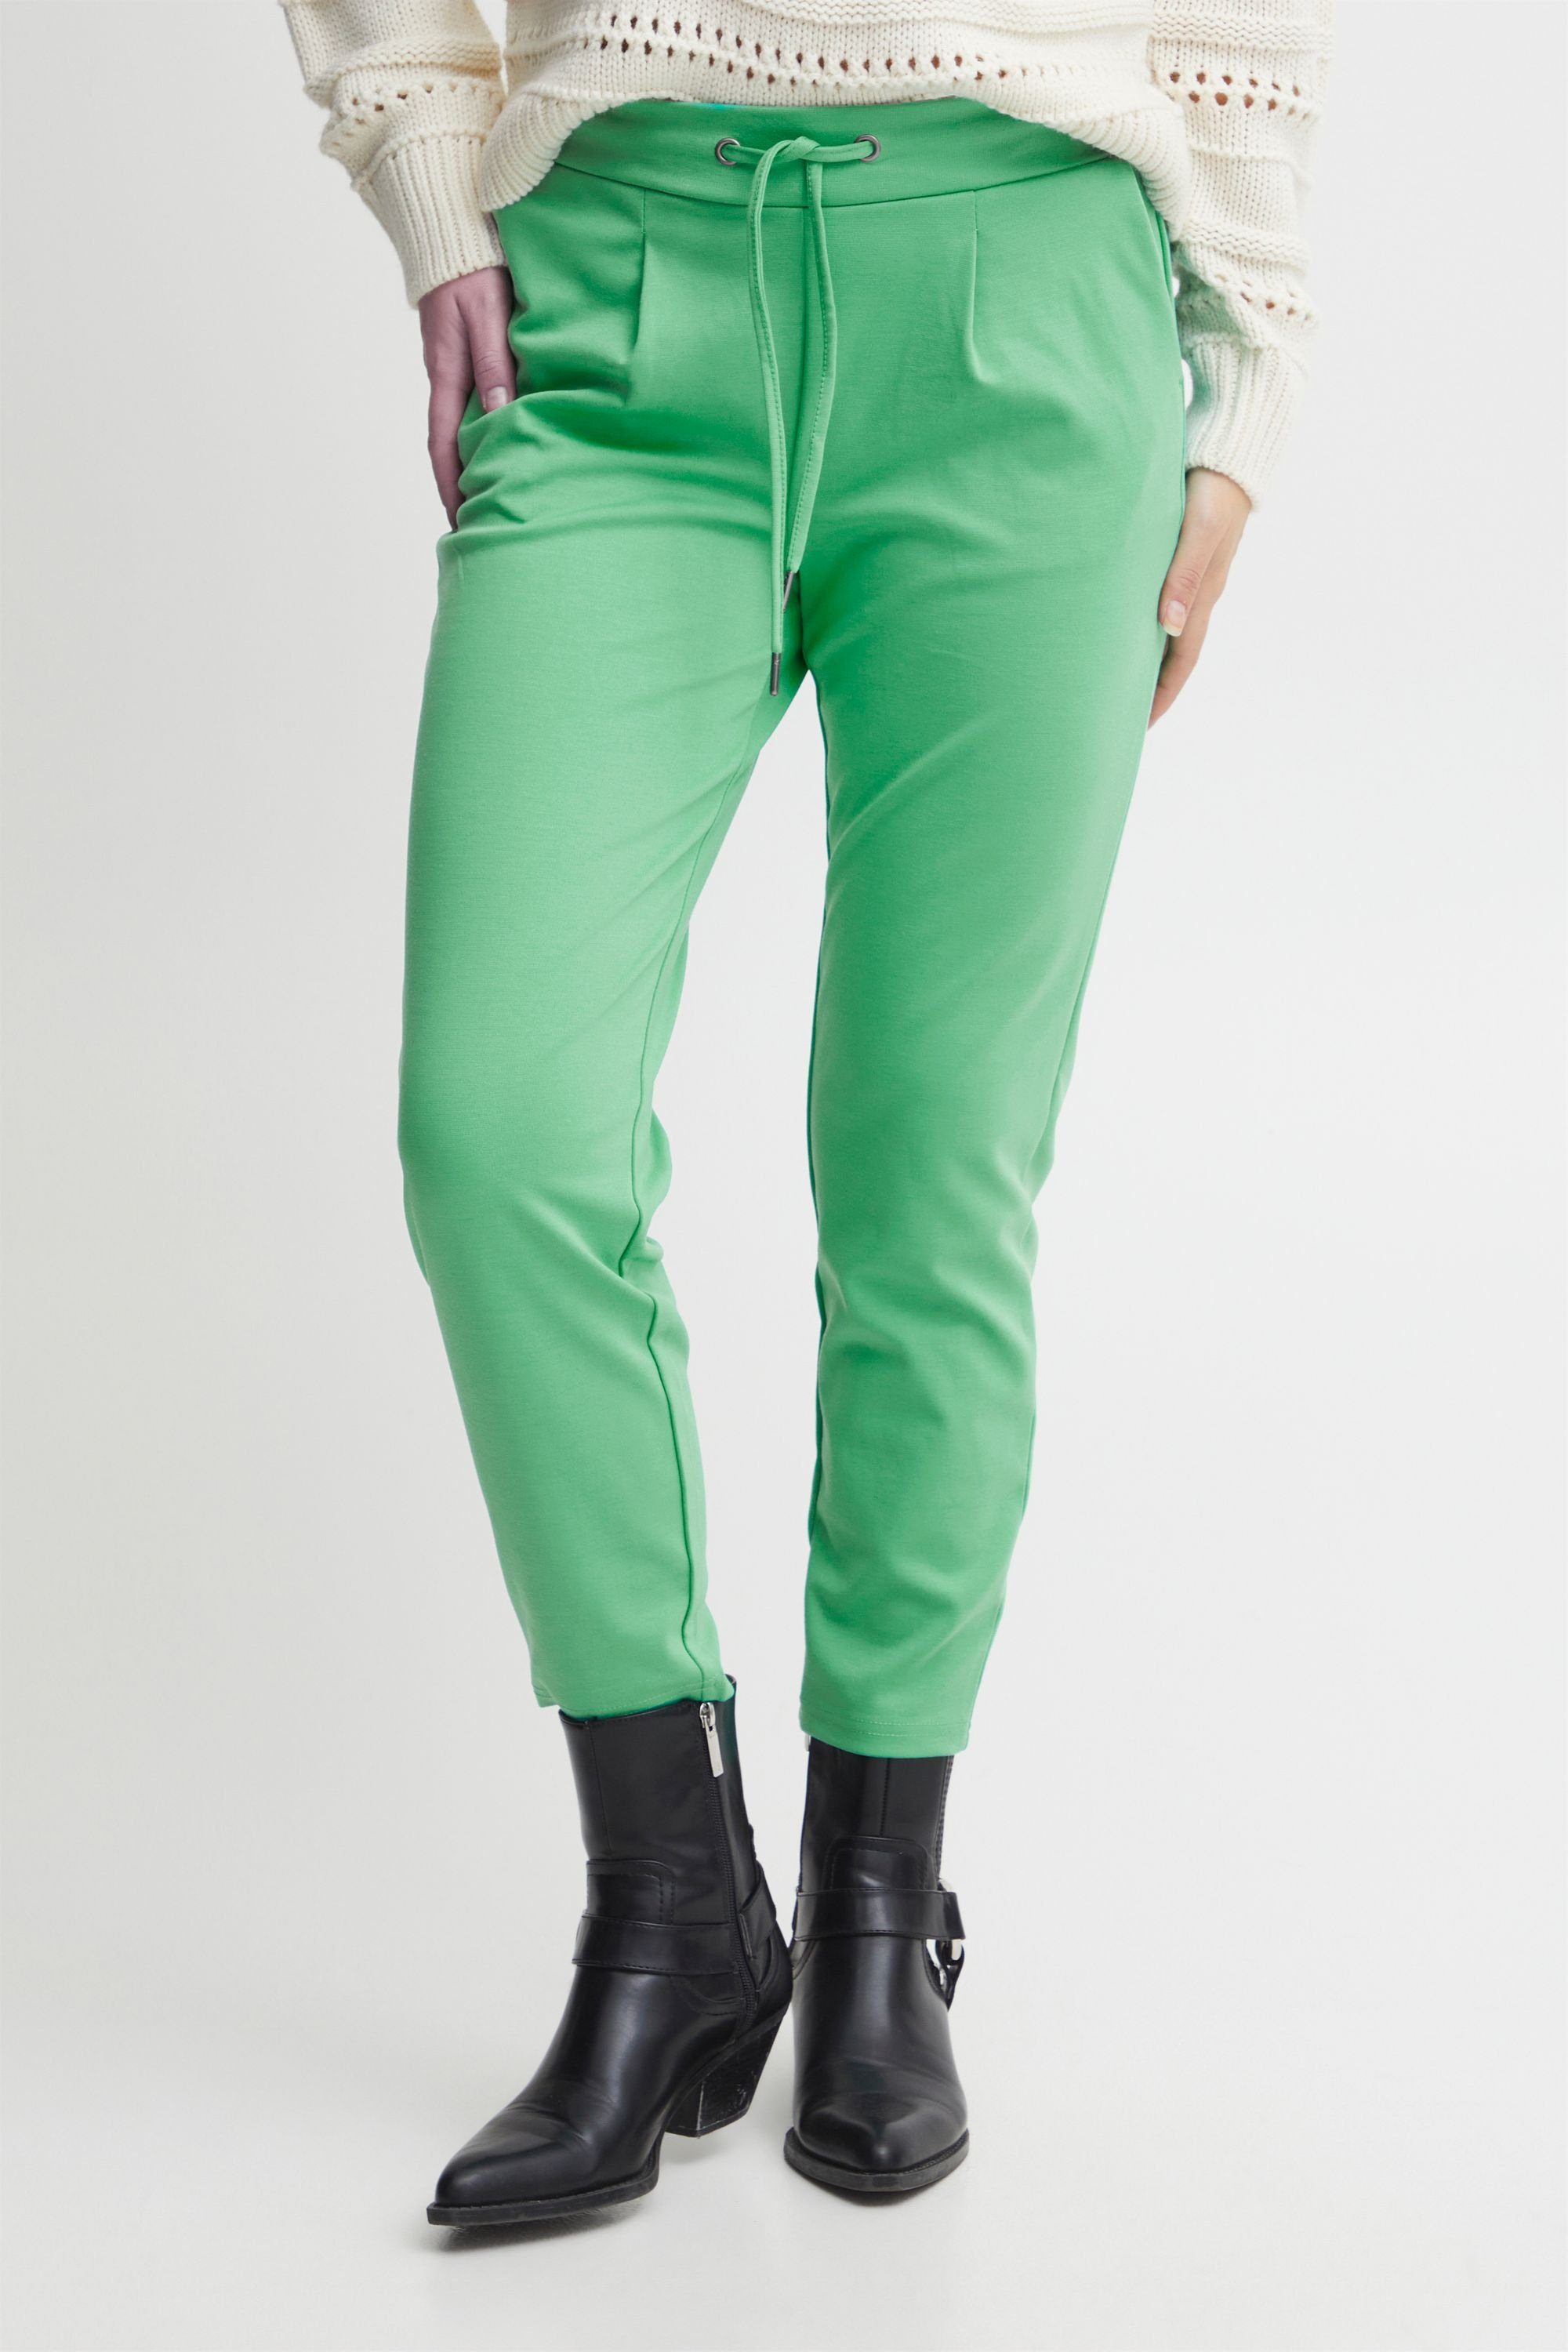 - Green (165930) Ming b.young BYRizetta pants Stoffhose 20803903 crop